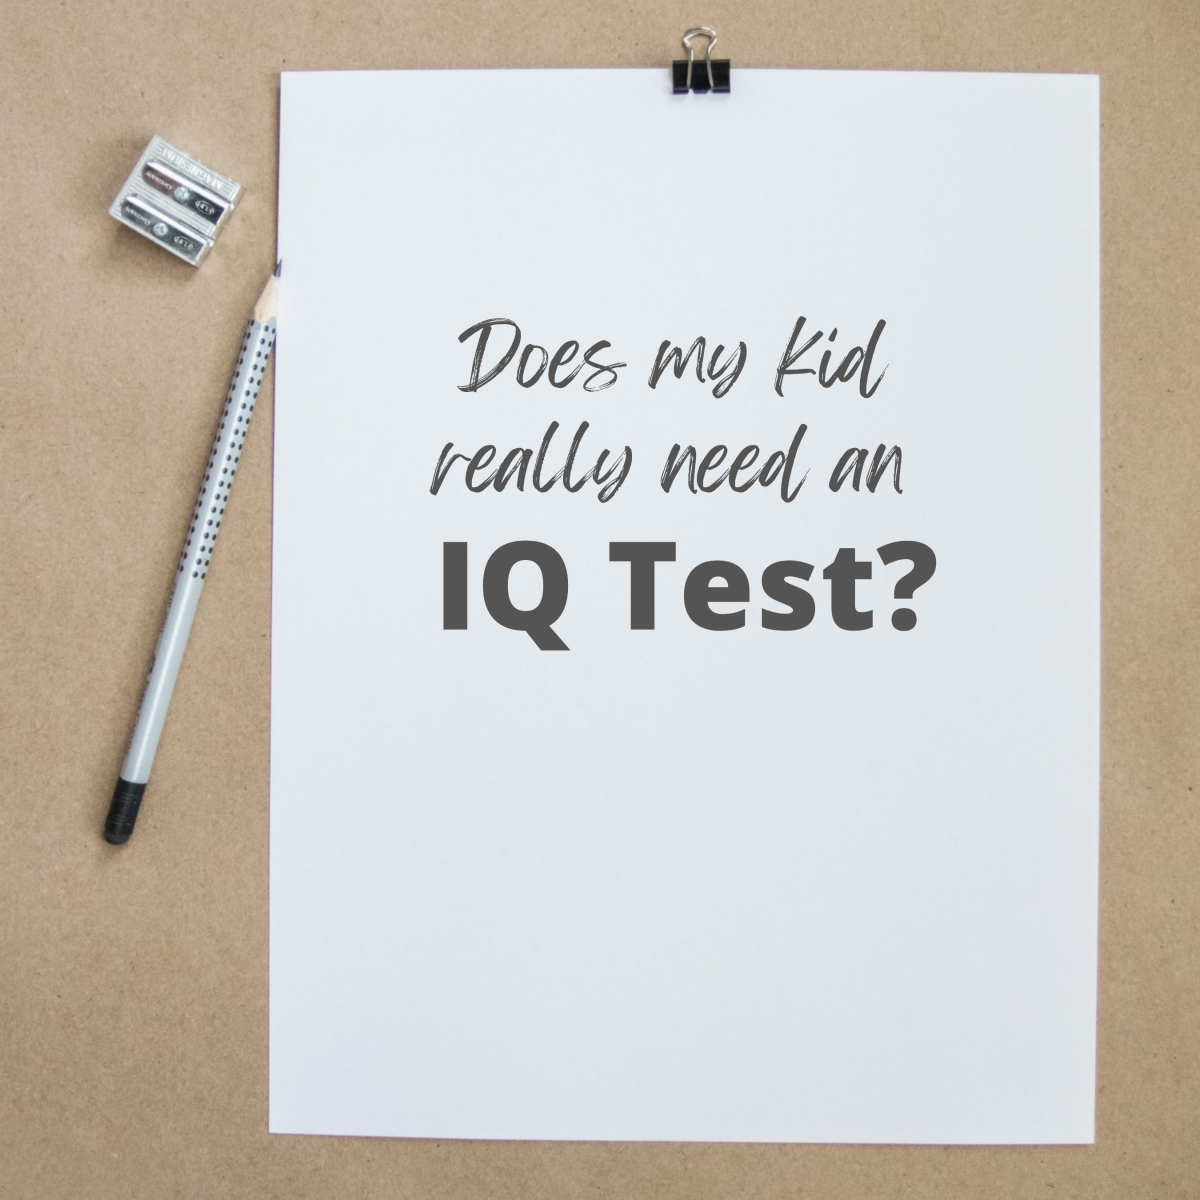 Does a kid really need an IQ test? What are the scores used for?